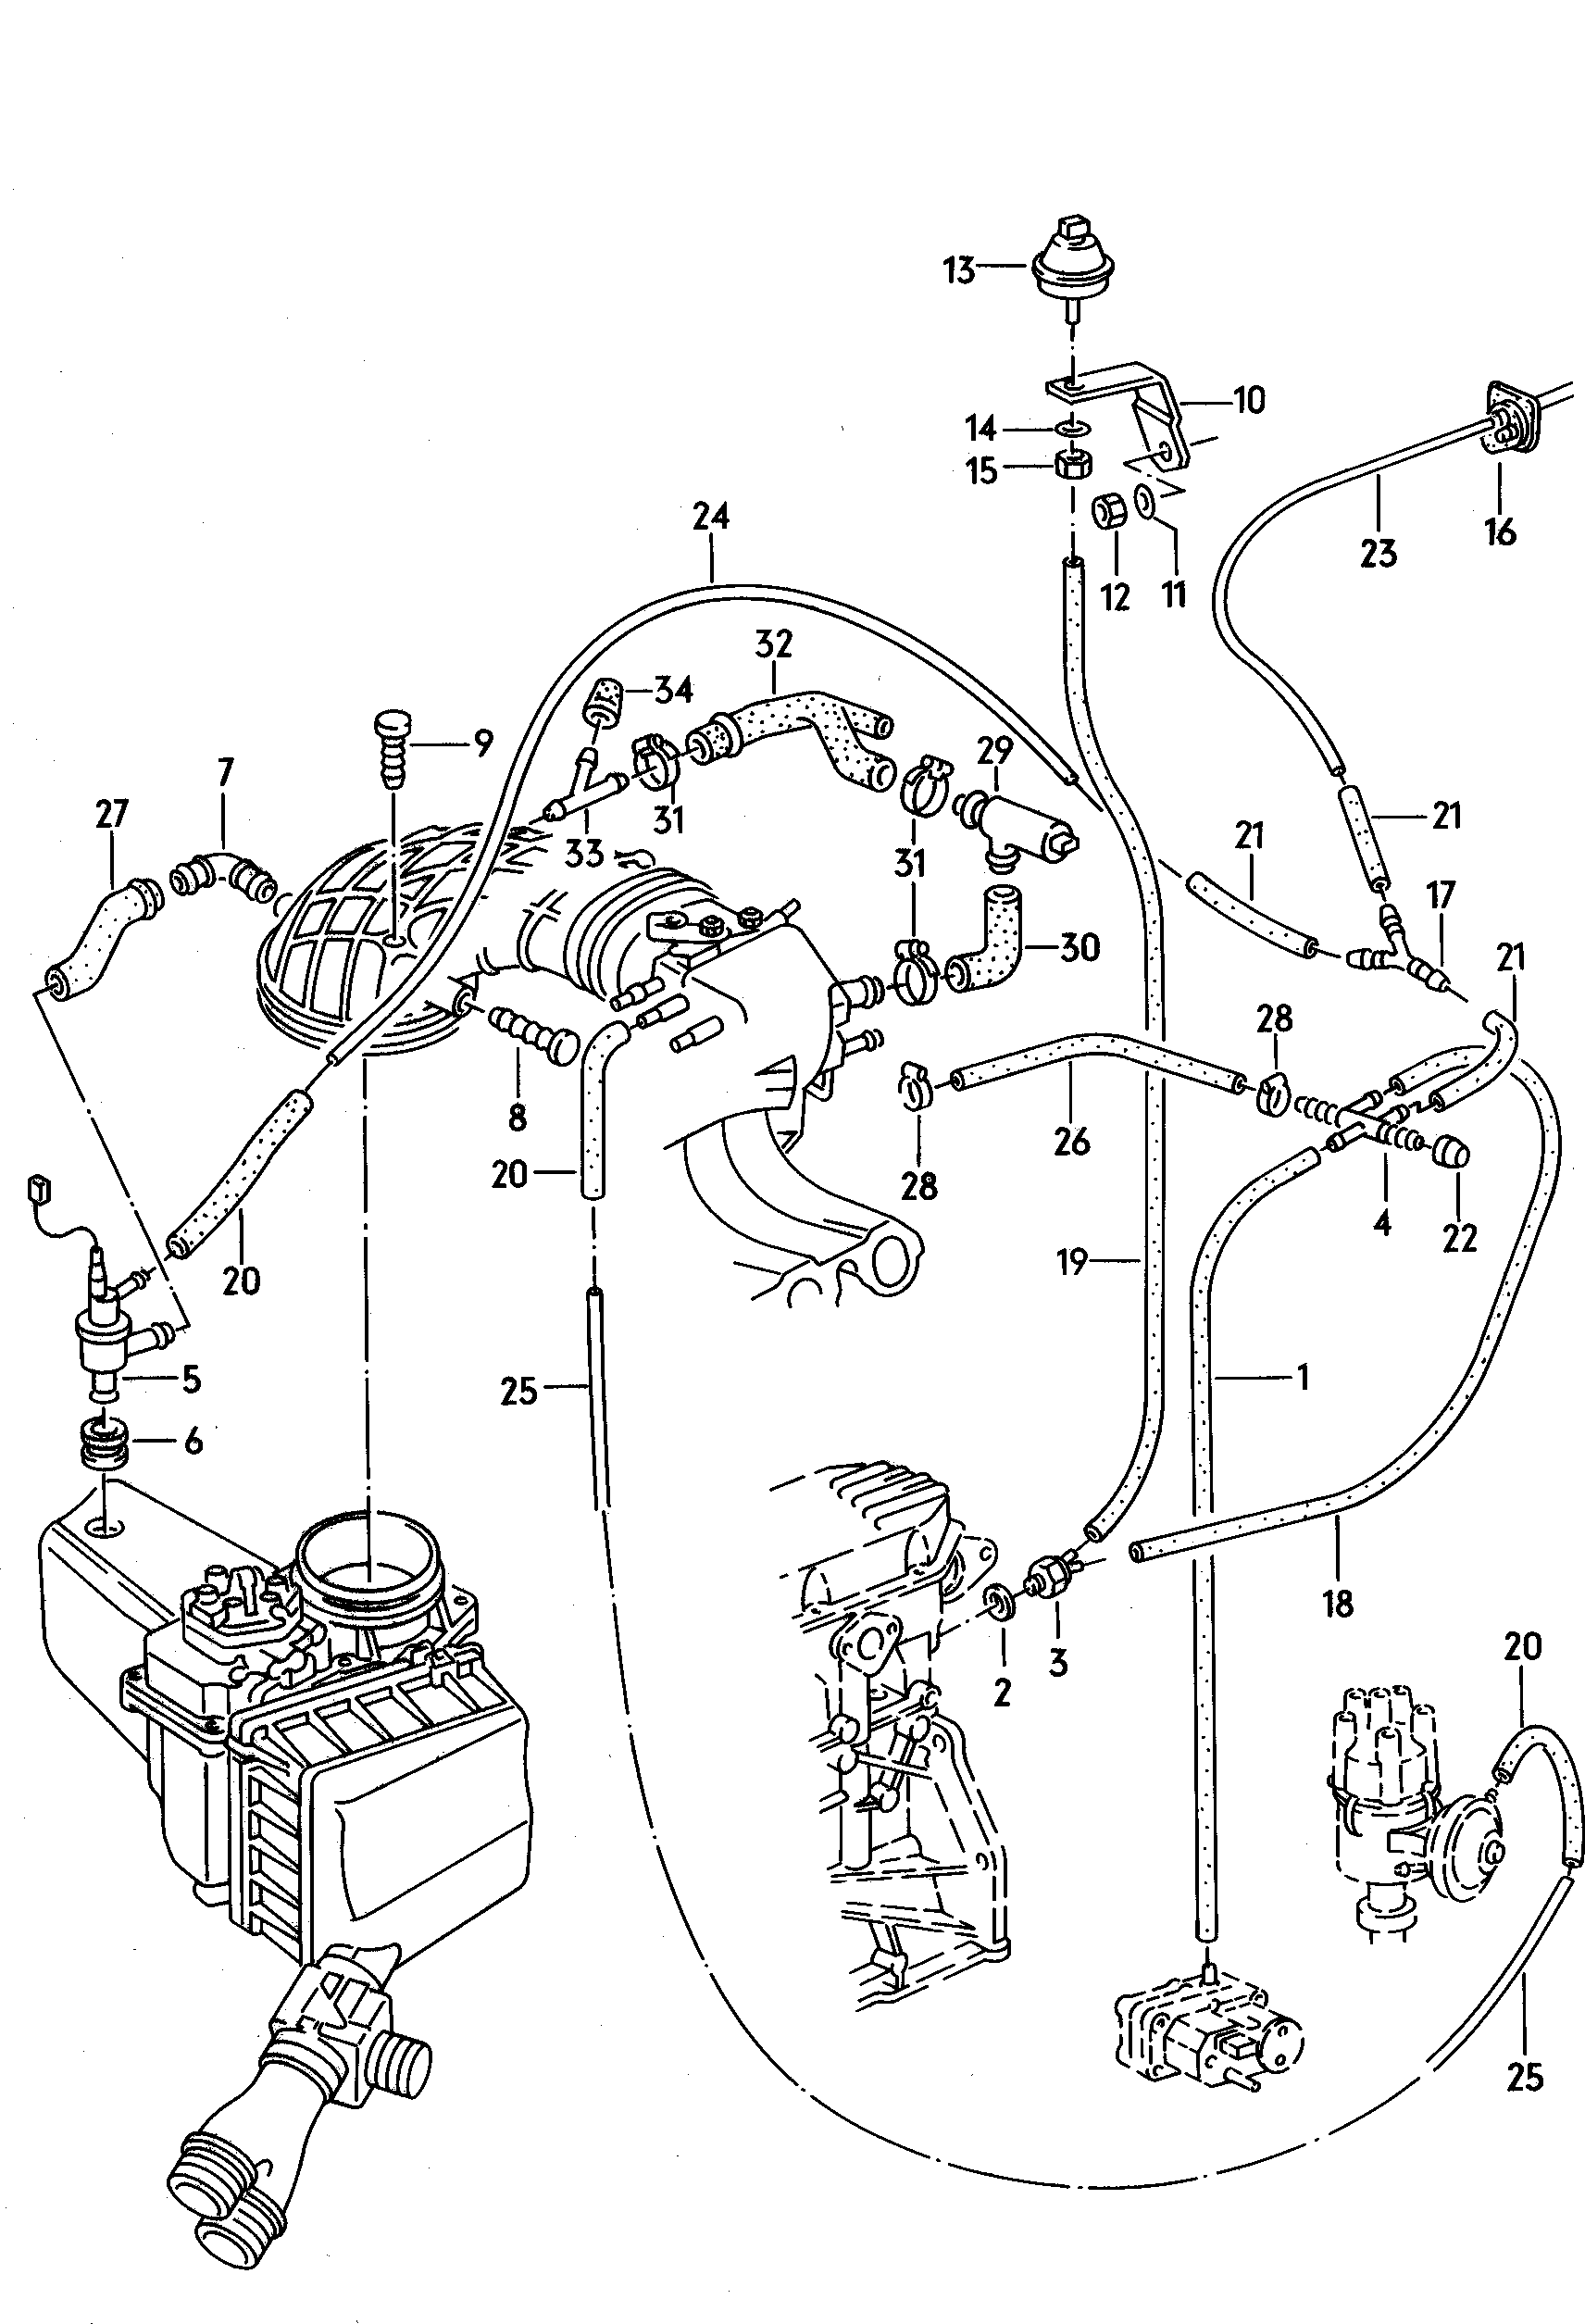 vacuum hoses with<br>connecting partsfor pneumatic differential<br>lock 2.2ltr.<br> K-JETRONIC - Audi 100/Avant quattro - a10q